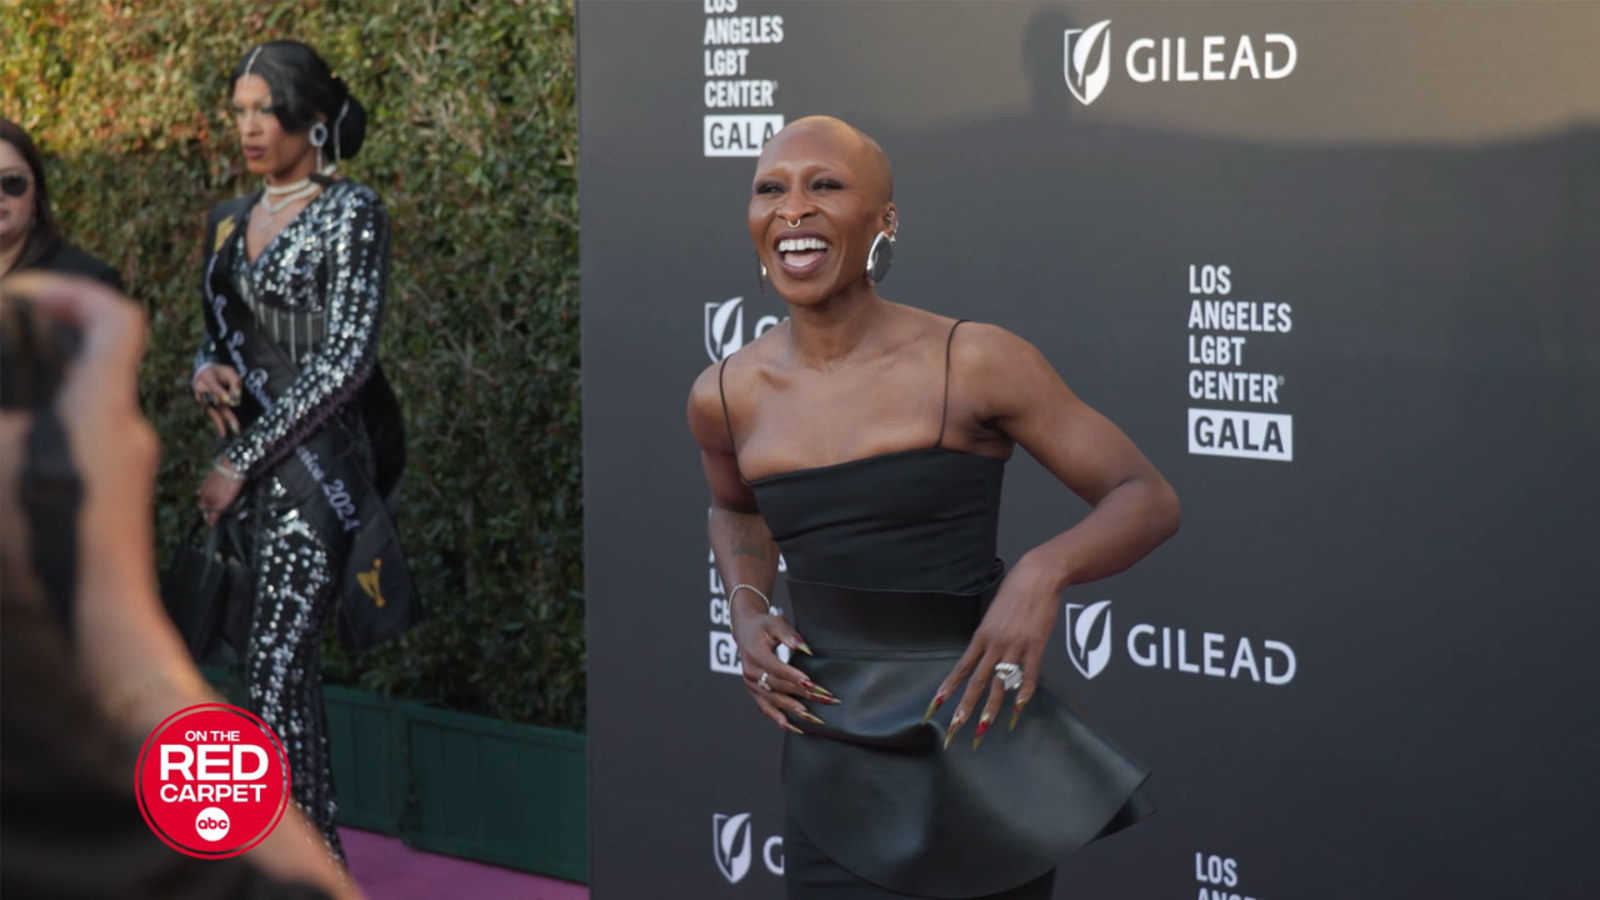 L.A. LGBT Center Gala celebrates with the stars at annual gala [Video]